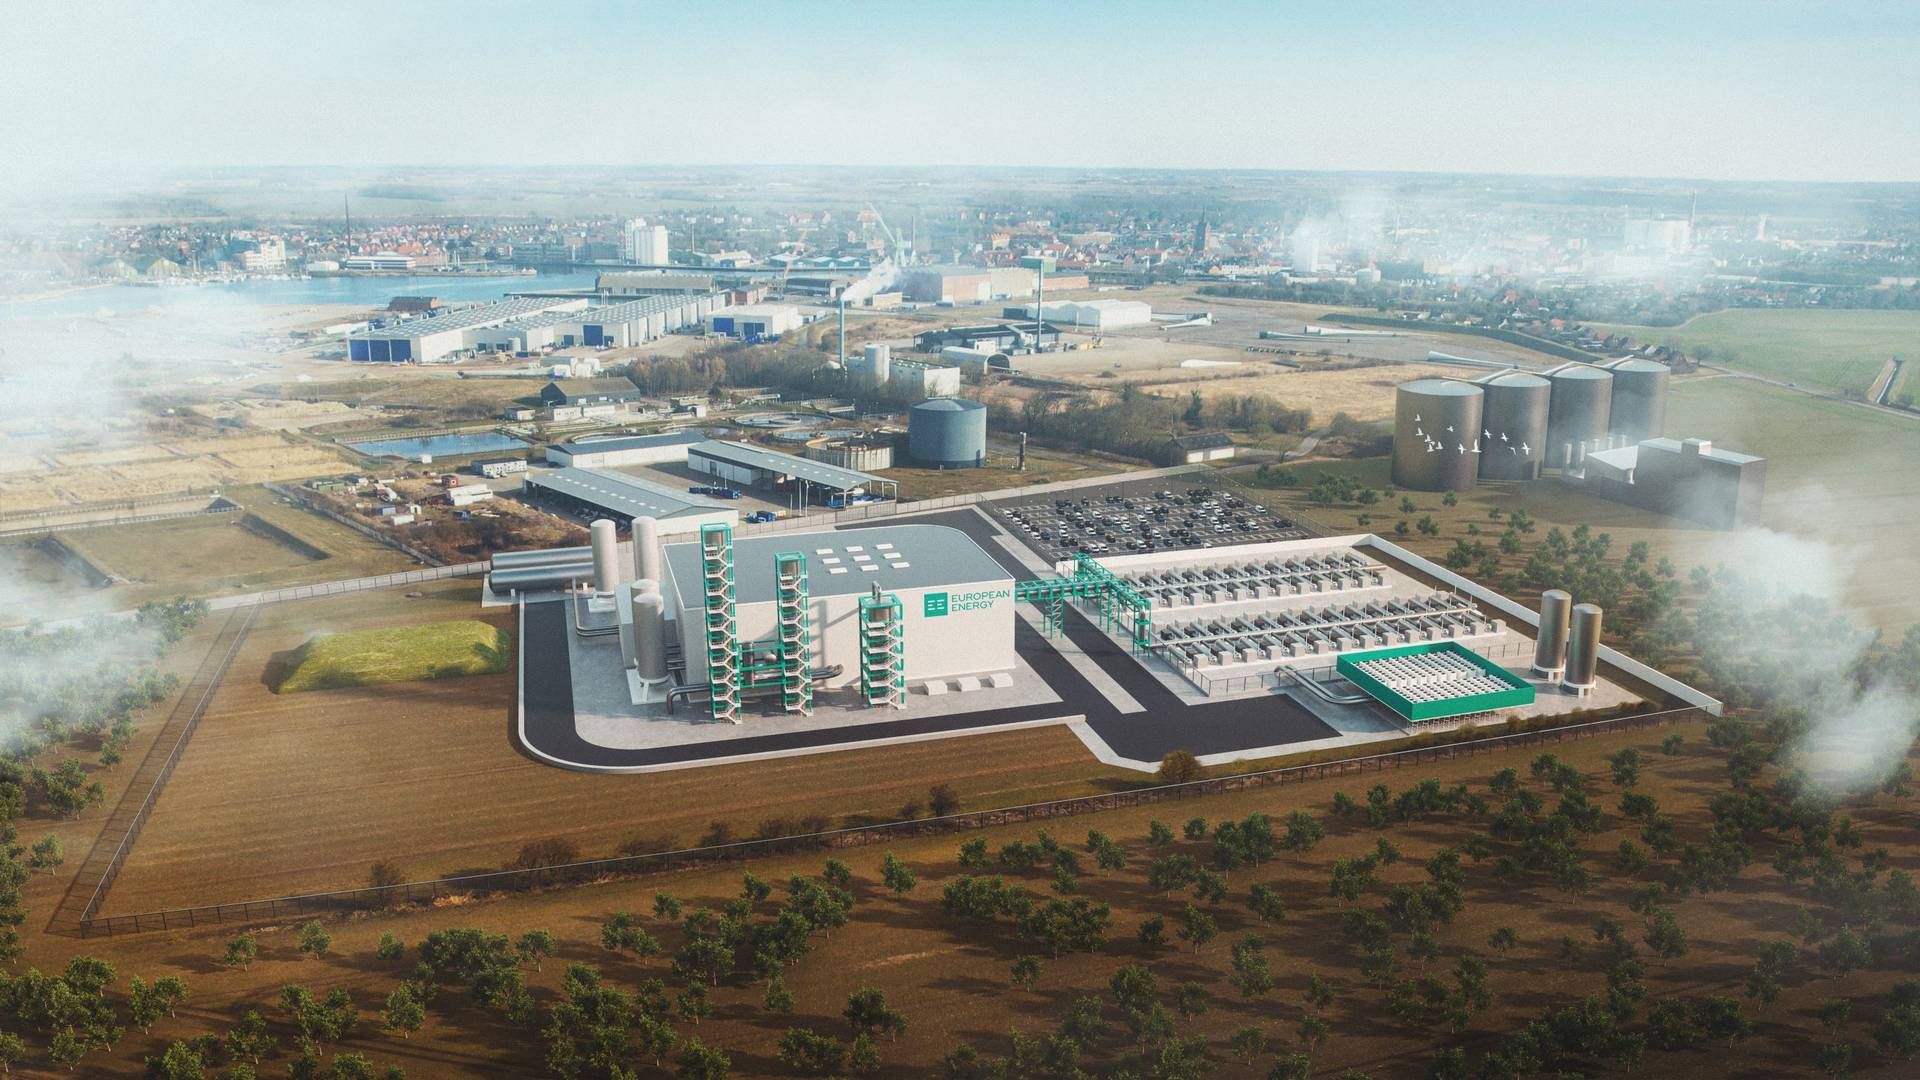 European Energy is also investing in e-fuels in Denmark, including the construction of the plant in Kassø, pictured here. | Photo: European Energy/pr.